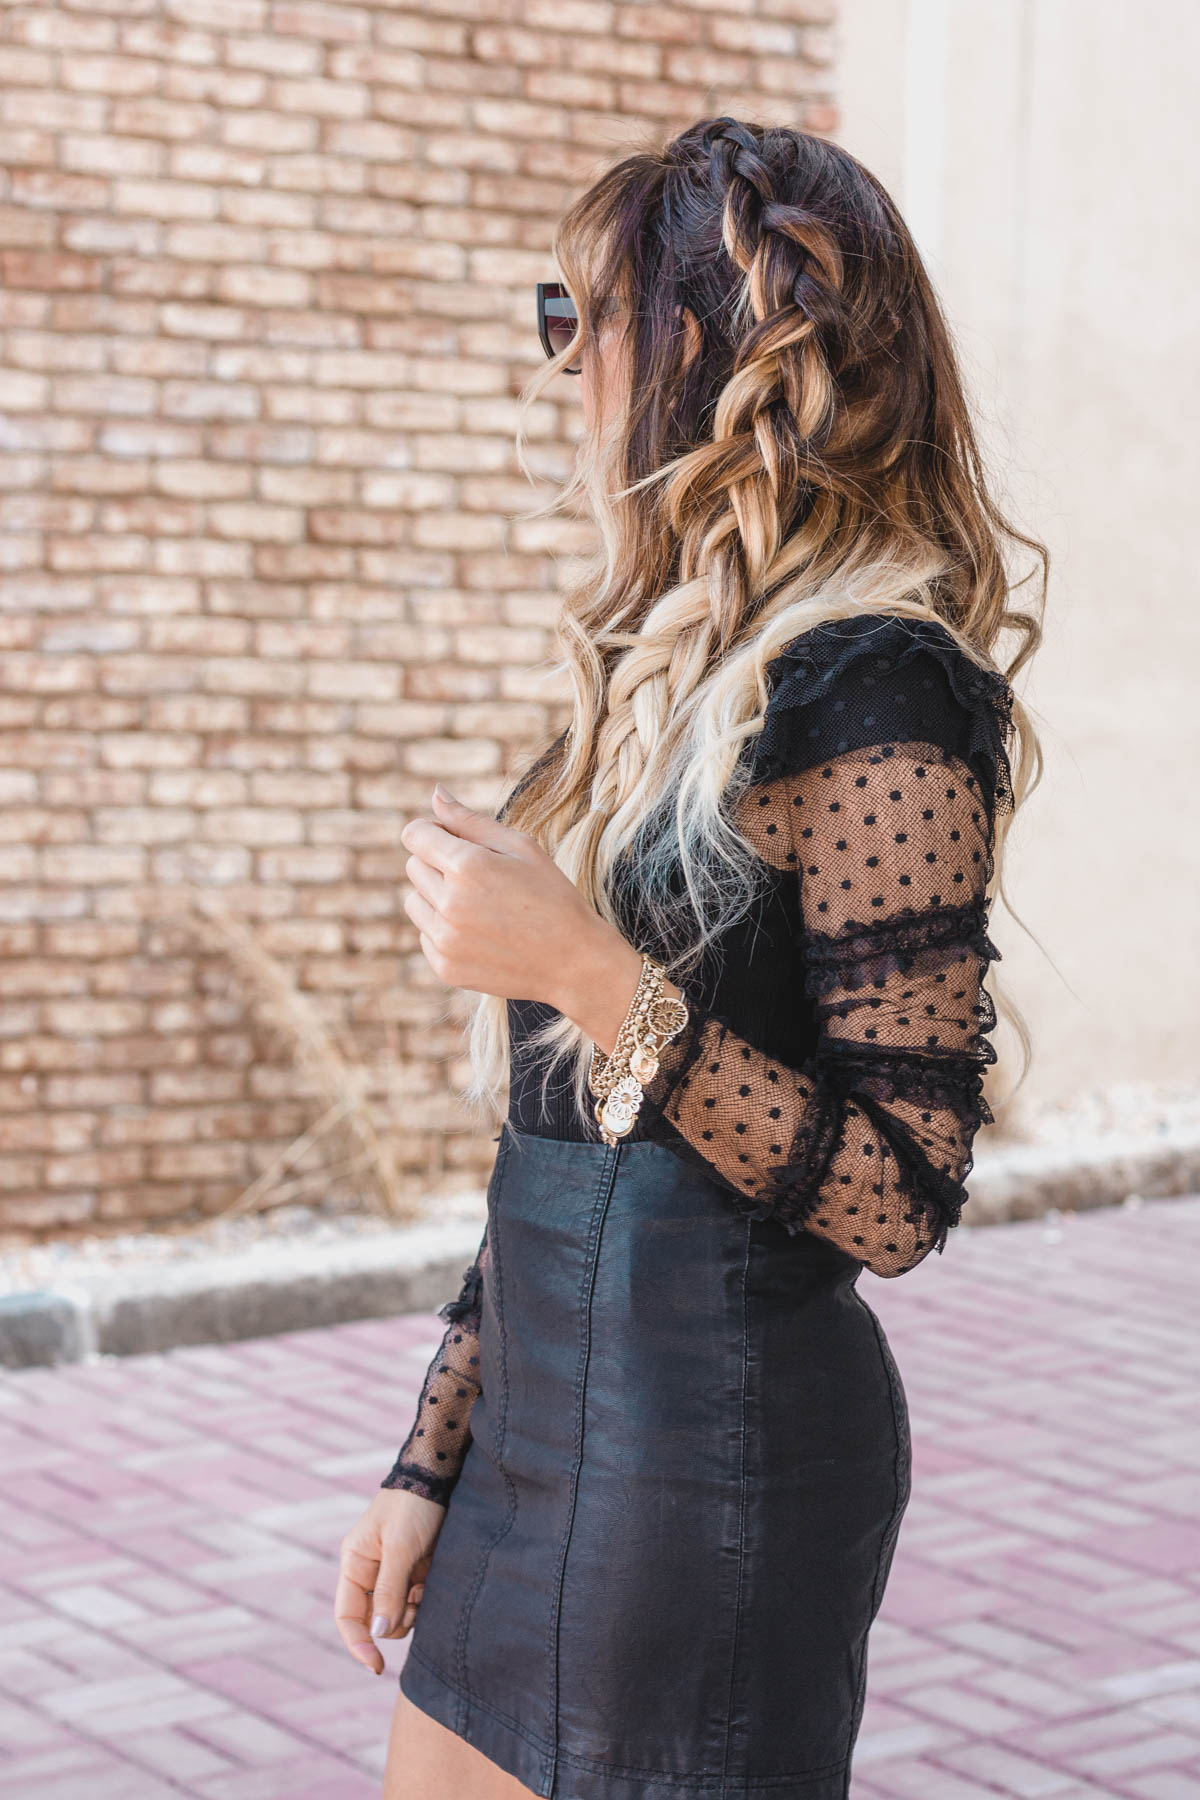 How to Style All Black for Holiday - All Black Outfit 